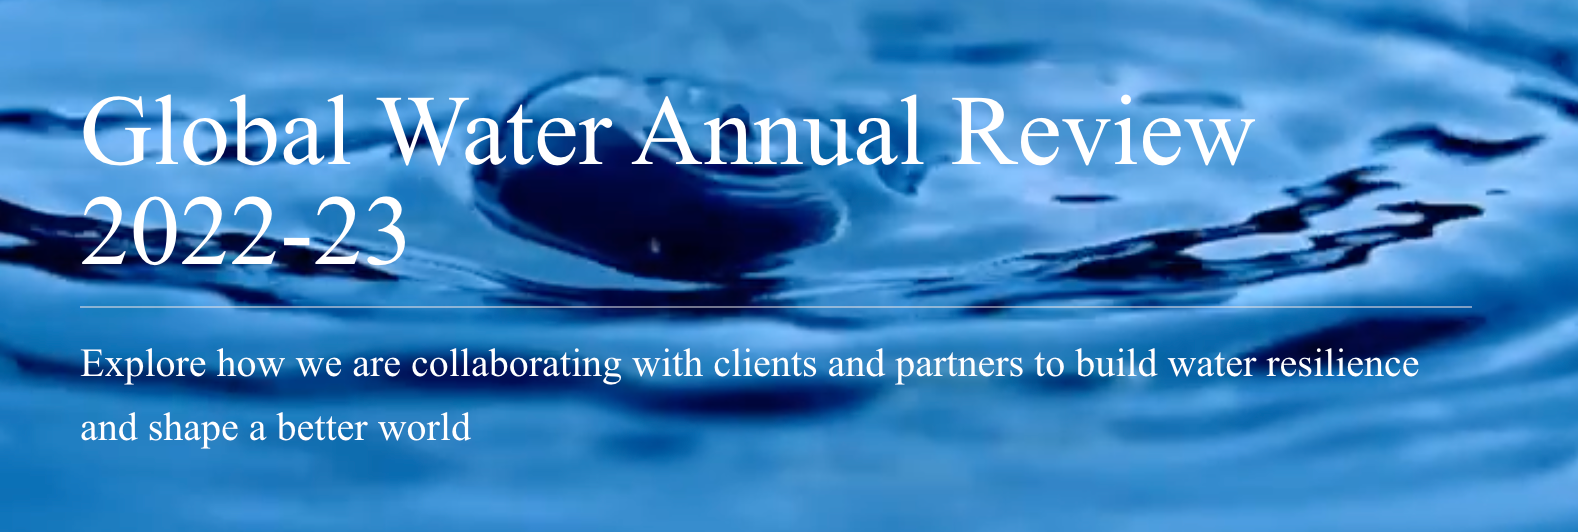 Global Water Annual Review for 2022-23